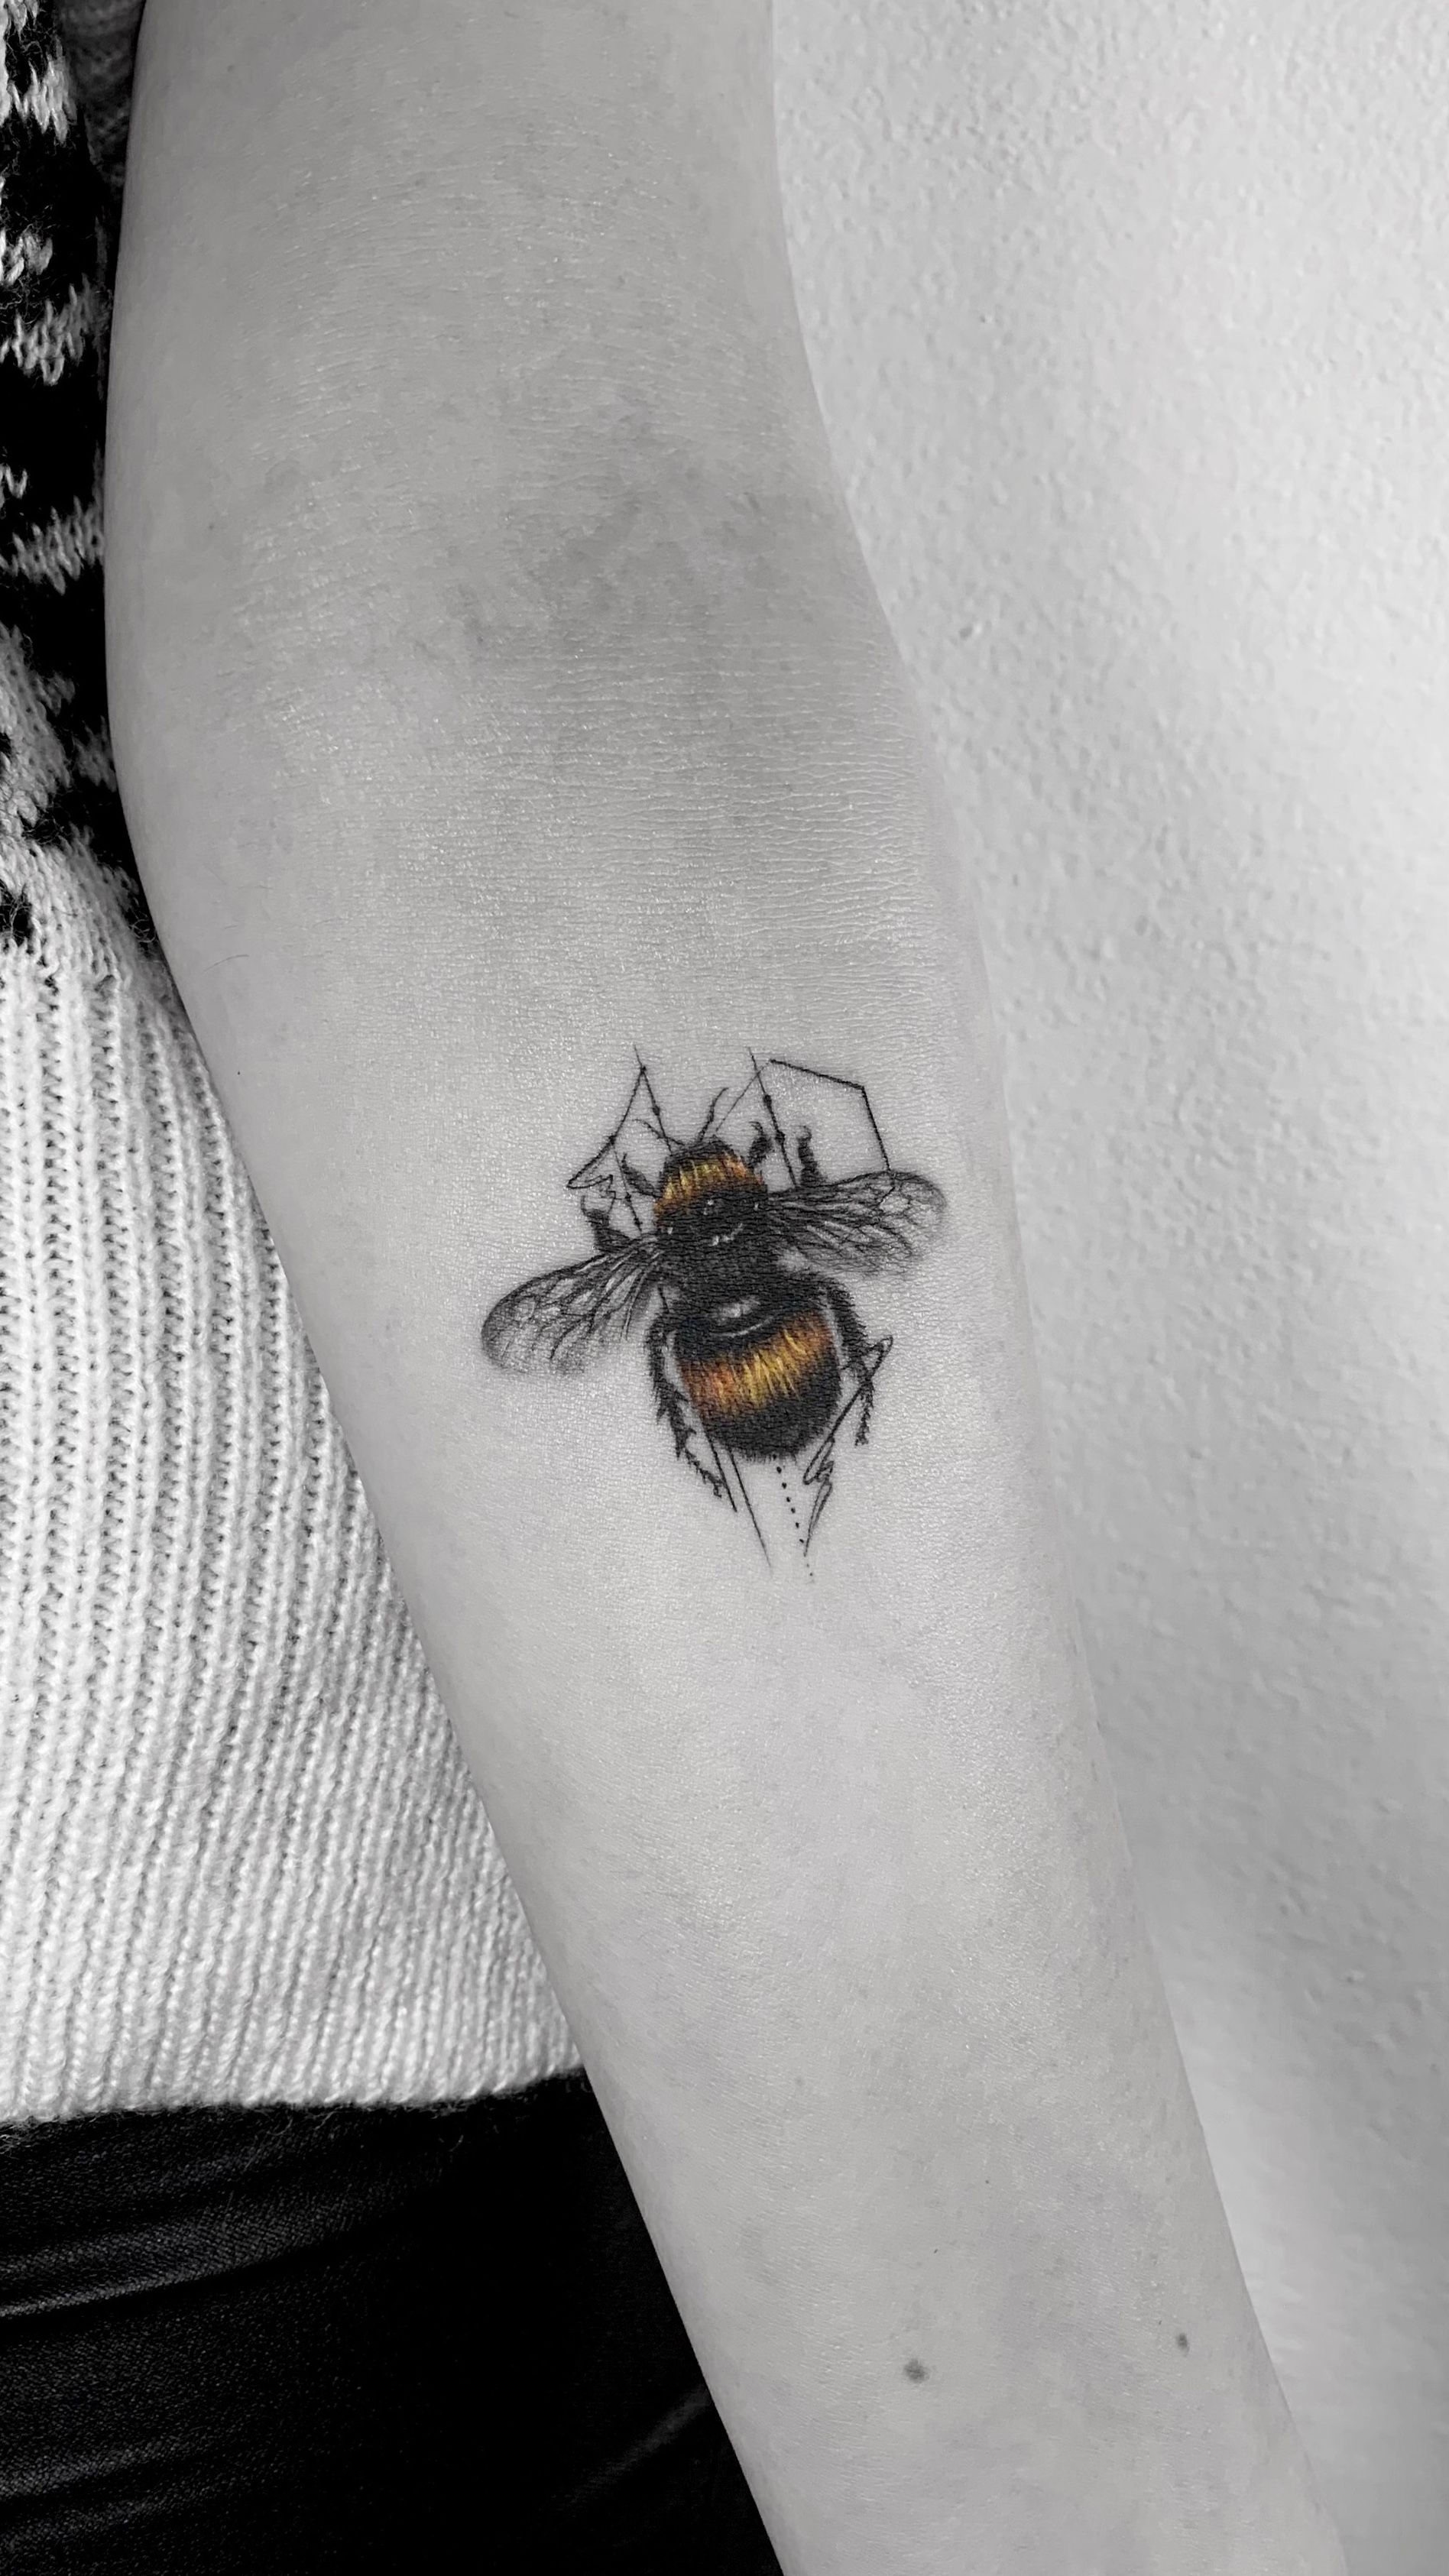 Small bumble bee tattoo by welcometoreality on DeviantArt